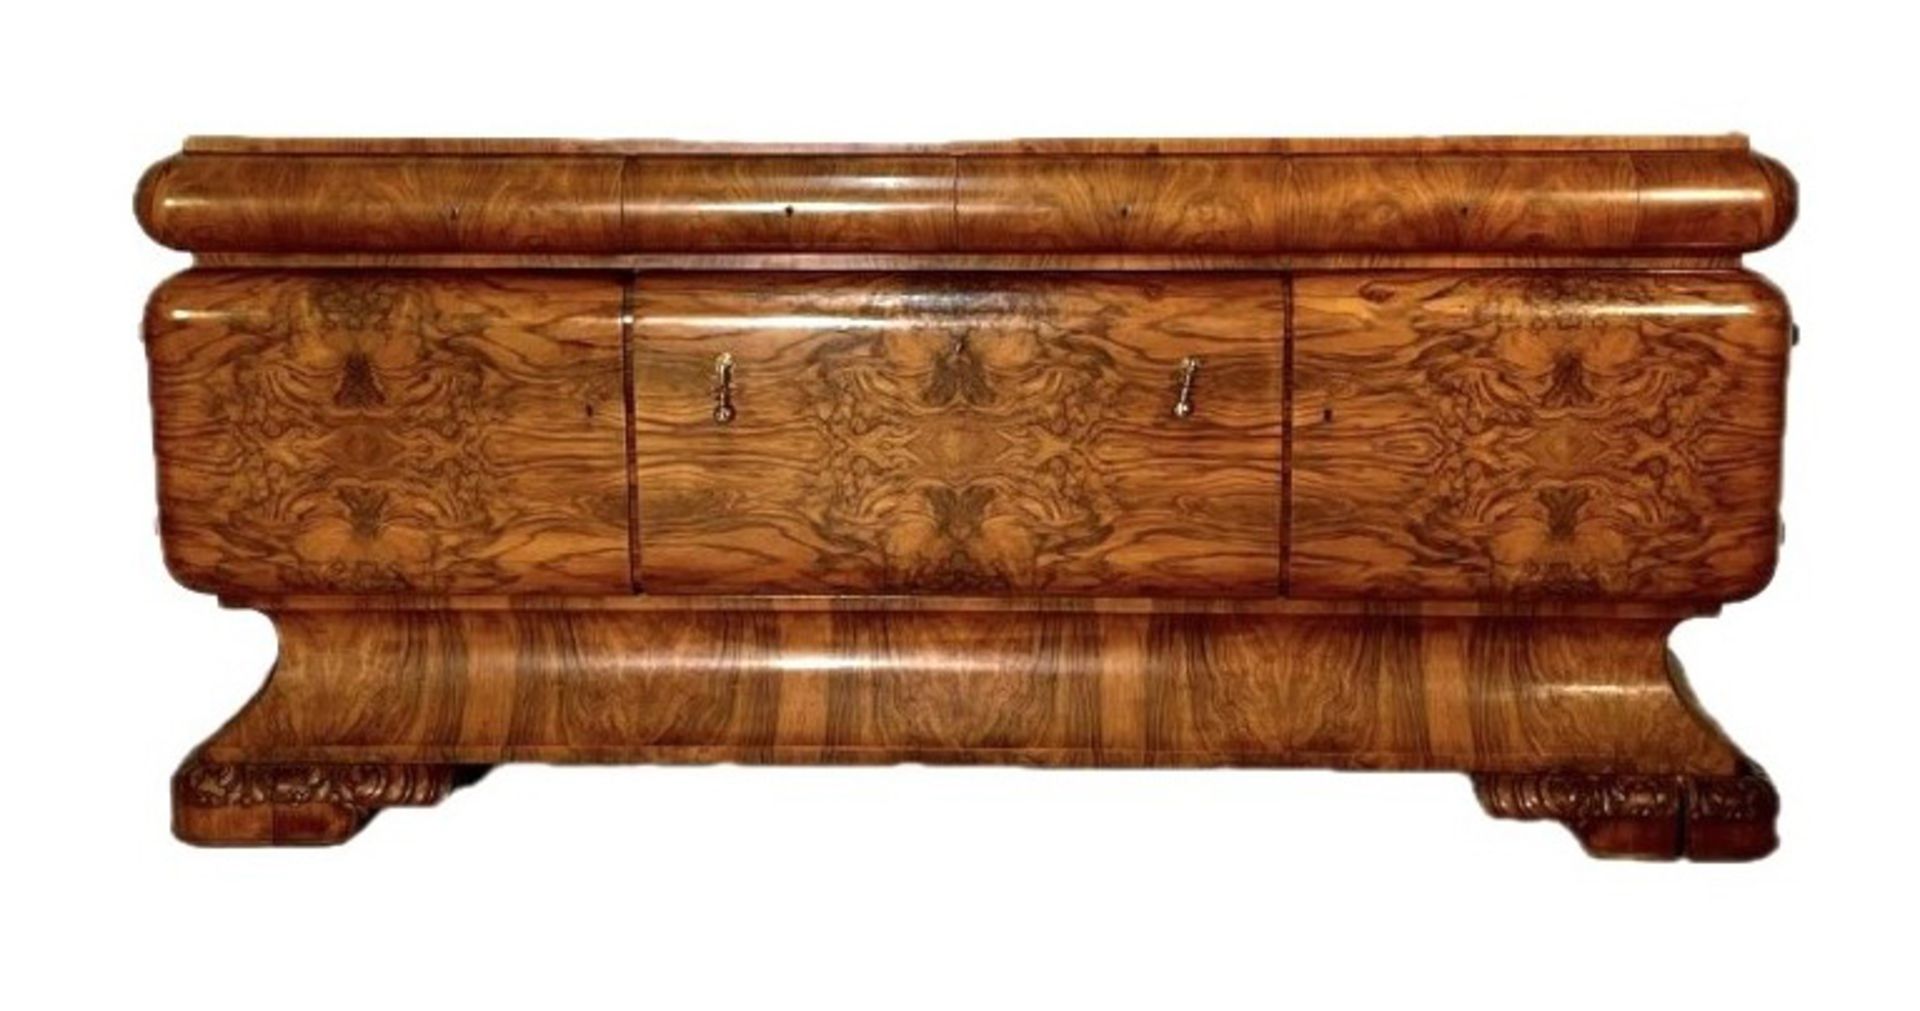 Art-déco sideboard from around 1930, burr walnut veneer, 113 x 250 x 66 cm - The furniture cannot be